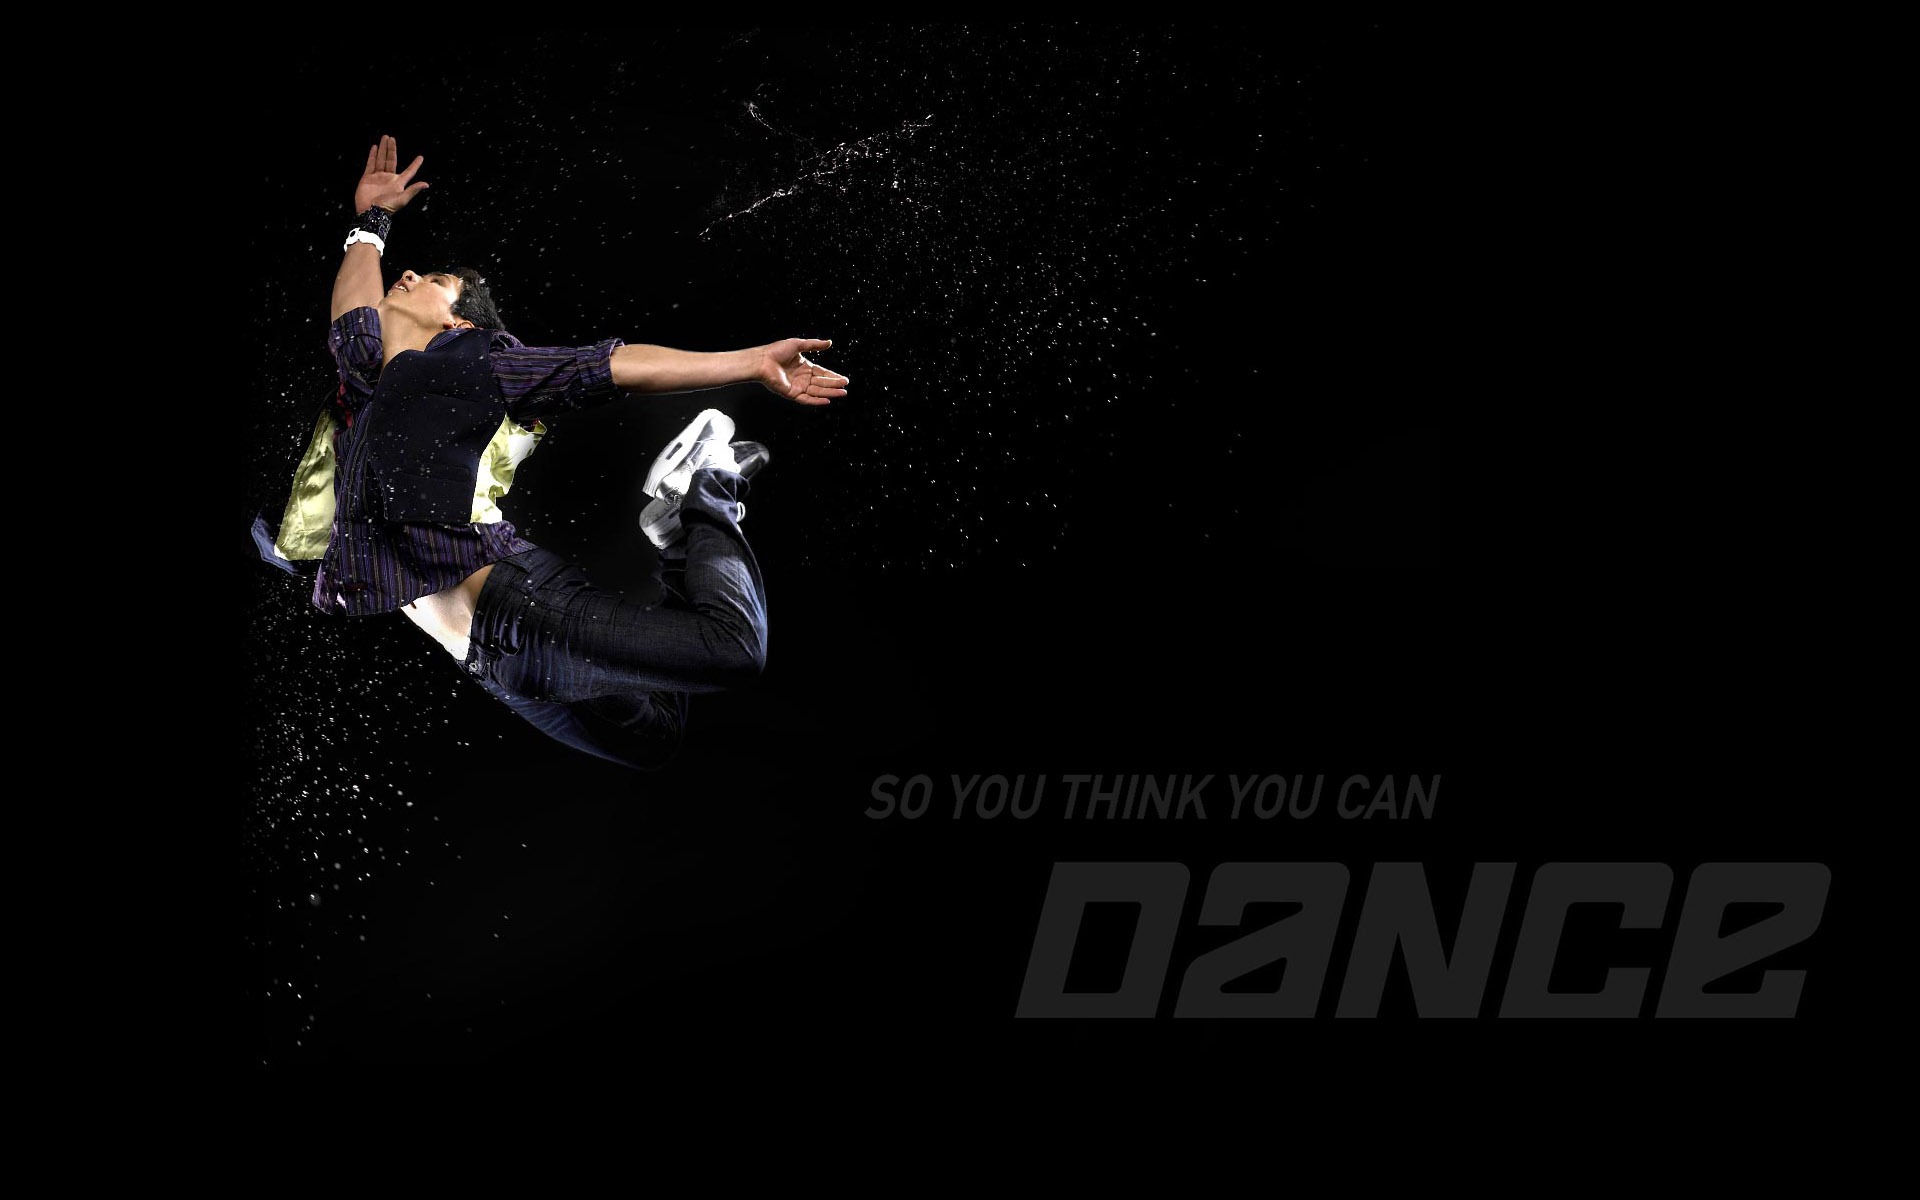 So You Think You Can Dance Wallpaper (1) #8 - 1920x1200